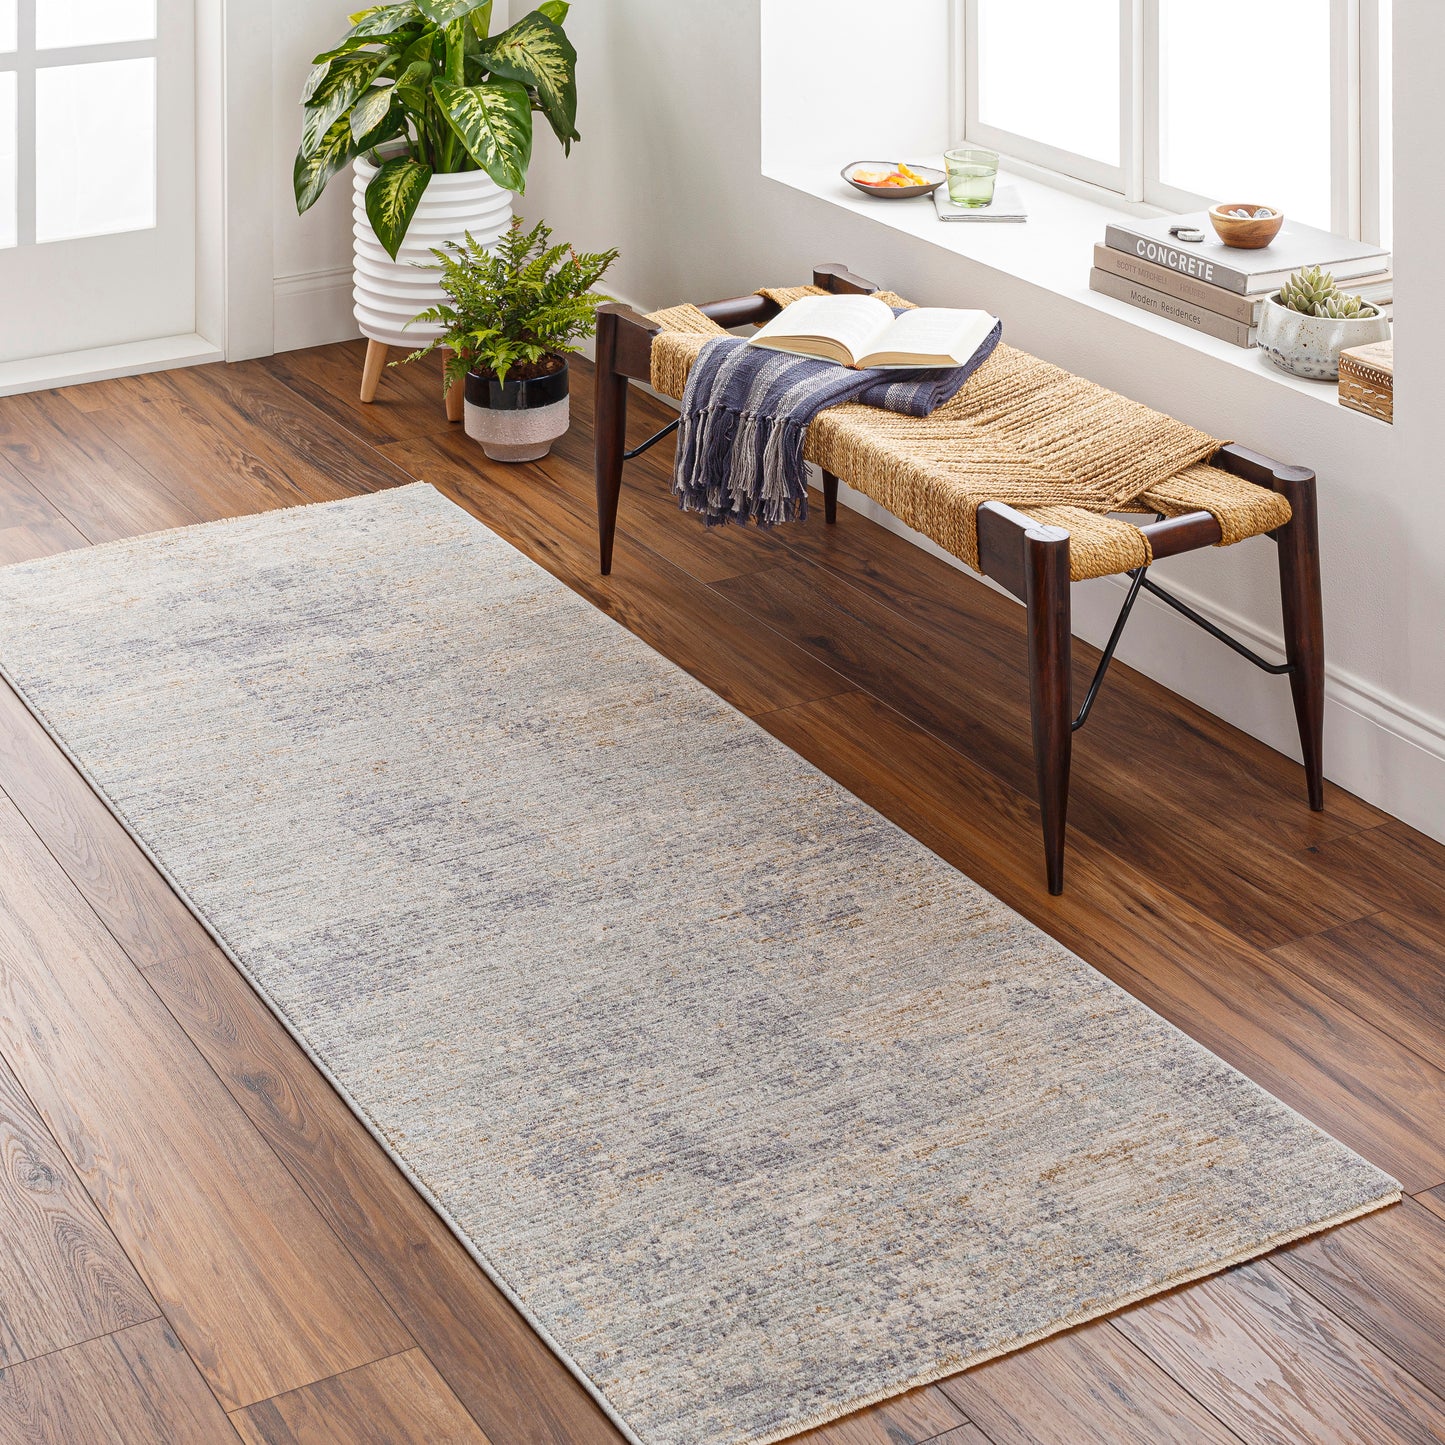 Avant Garde 30988 Machine Woven Synthetic Blend Indoor Area Rug by Surya Rugs